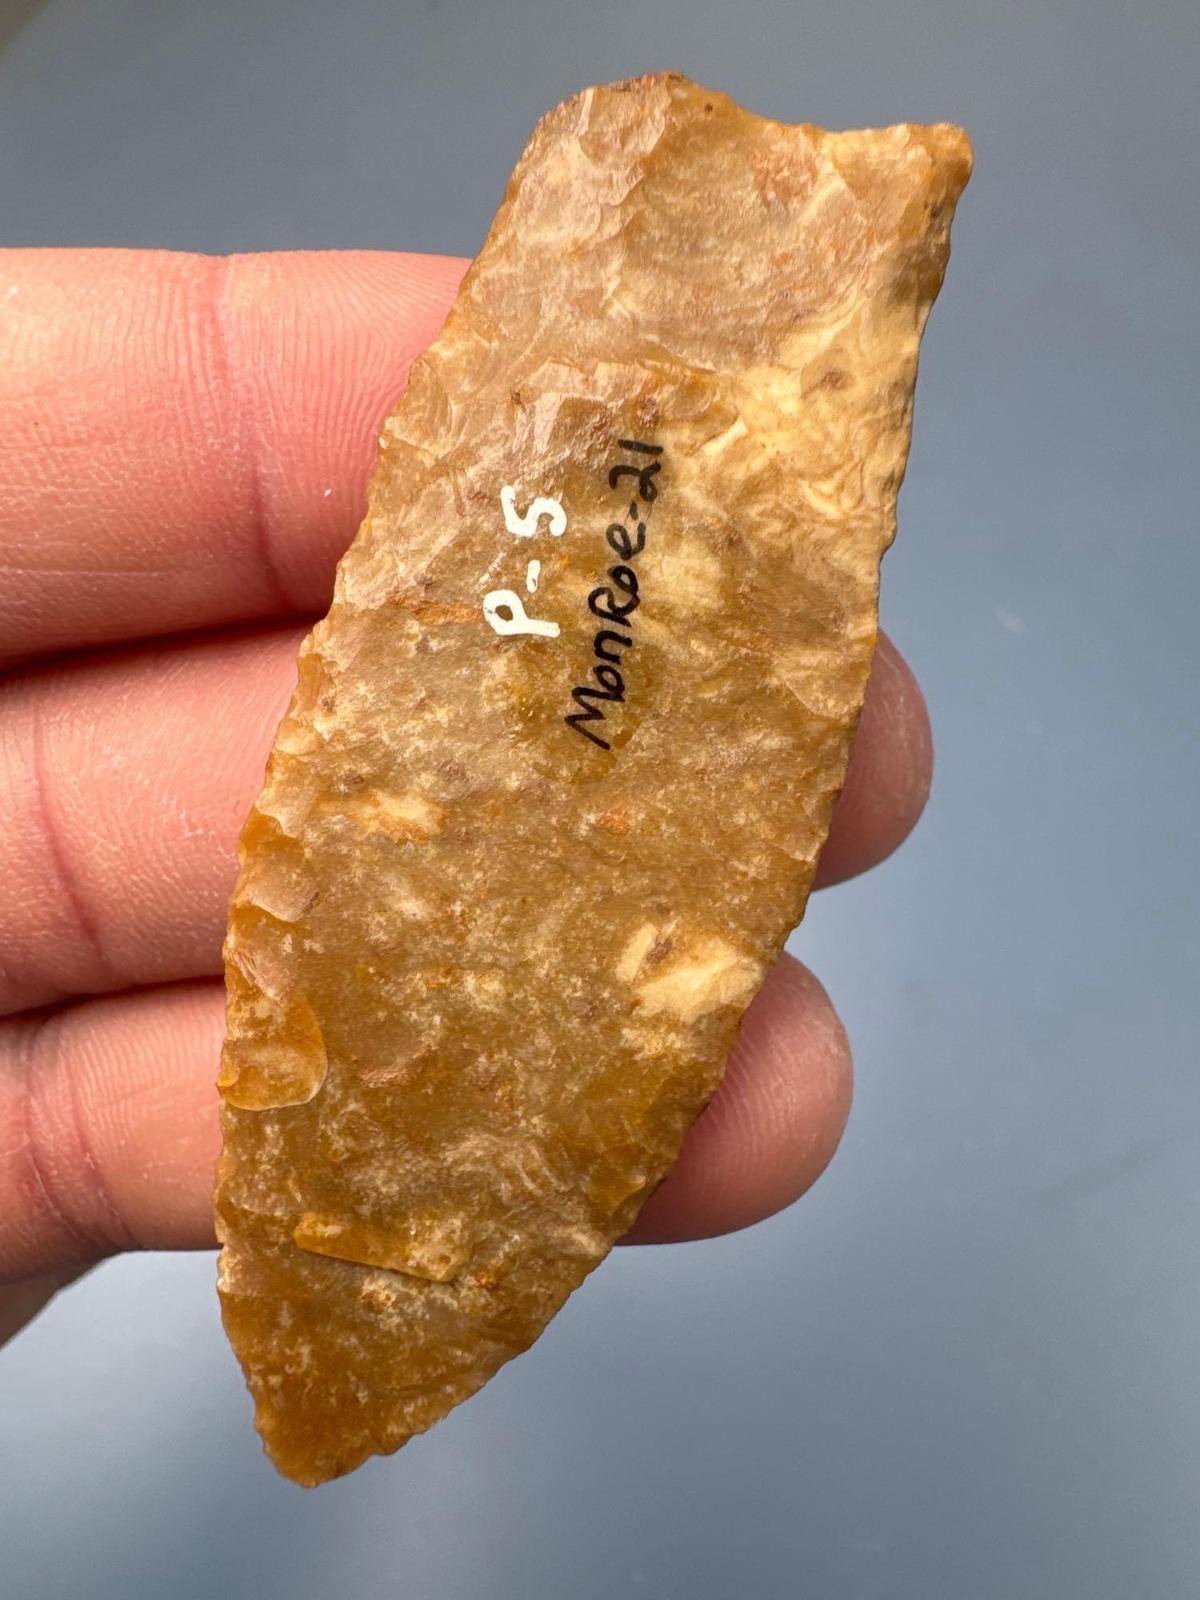 HIGHLIGHT 2 3/4" Barnes Fluted Point, Yellow Jasper, Found in Monroe Co., PA, by Fred Altemost, Pict